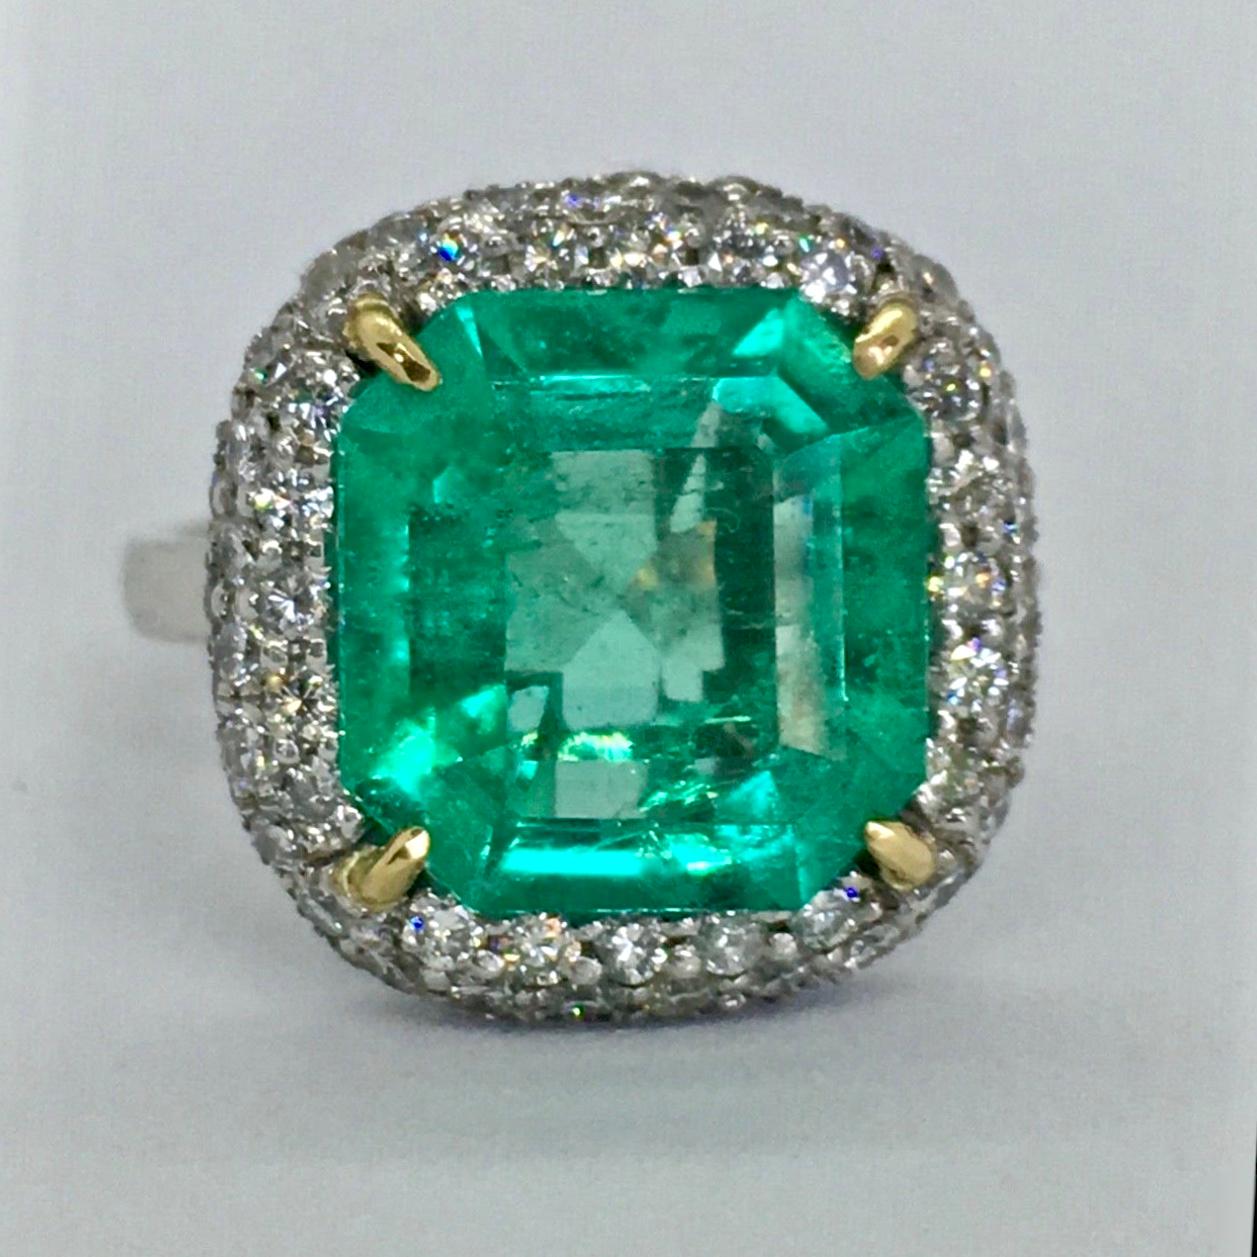 Stunning Extra Fine Natural Colombia Emerald, Diamond and 18K white Gold handmade Engagement Ring from our Workshop.
Fine Natural Colombian Emerald octagonal faceted 5.73 Carats
12.60mm x 11.85mm x 6.30mm
Color: AAAA vivid medium green 
Saturation: